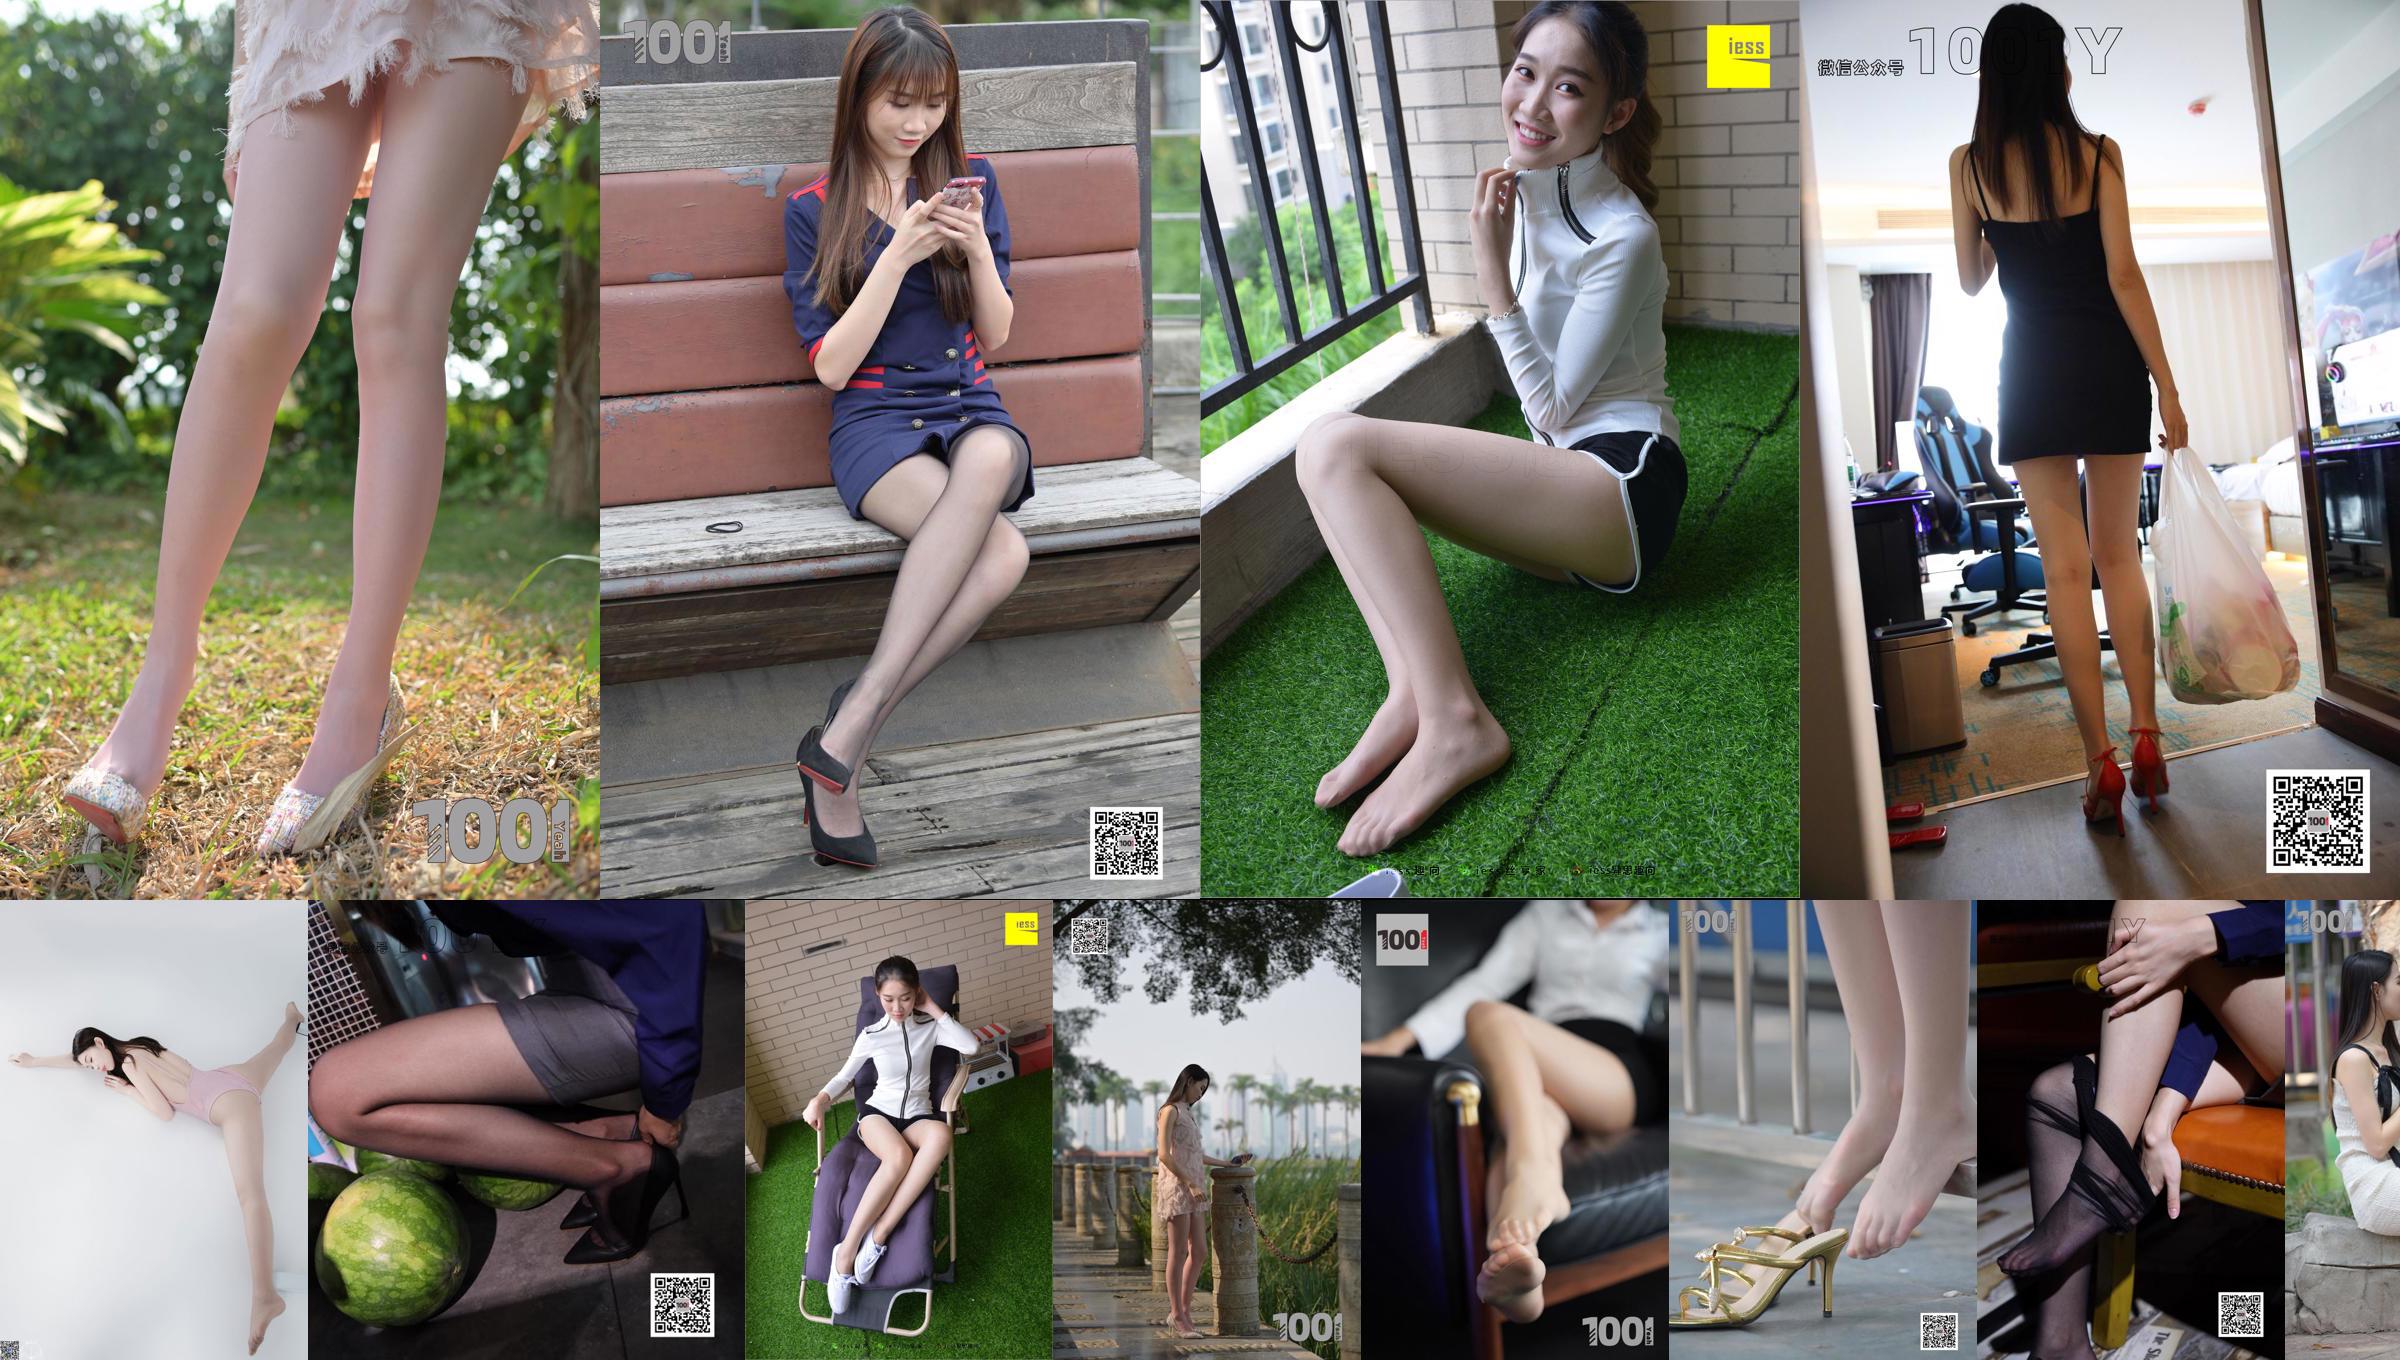 Legs and legs "Internet Addiction Girl 3" [IESS One Thousand and One Nights] Beautiful legs in stockings No.90e0e6 Page 6